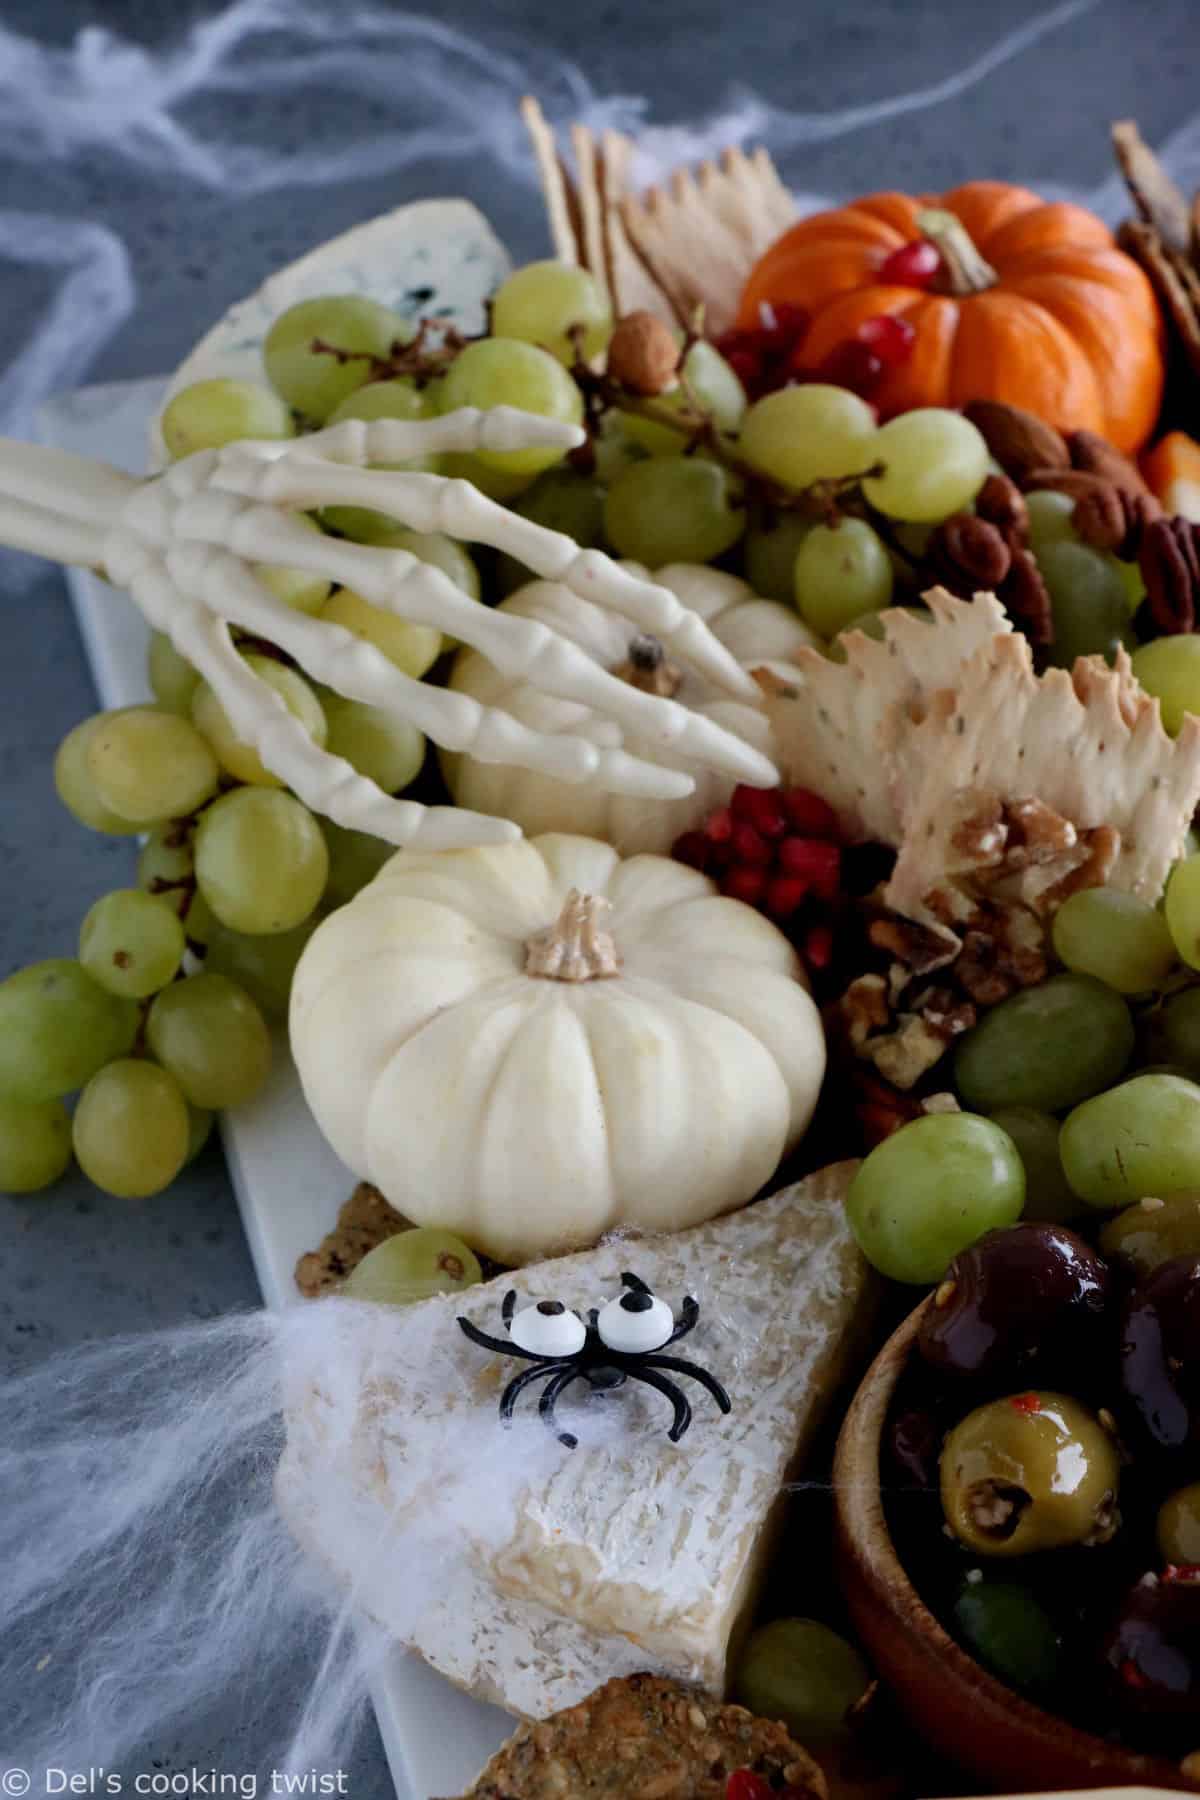 This killer vegetarian Halloween grazing board is a fun and spooky way to get you into the Halloween spirit.